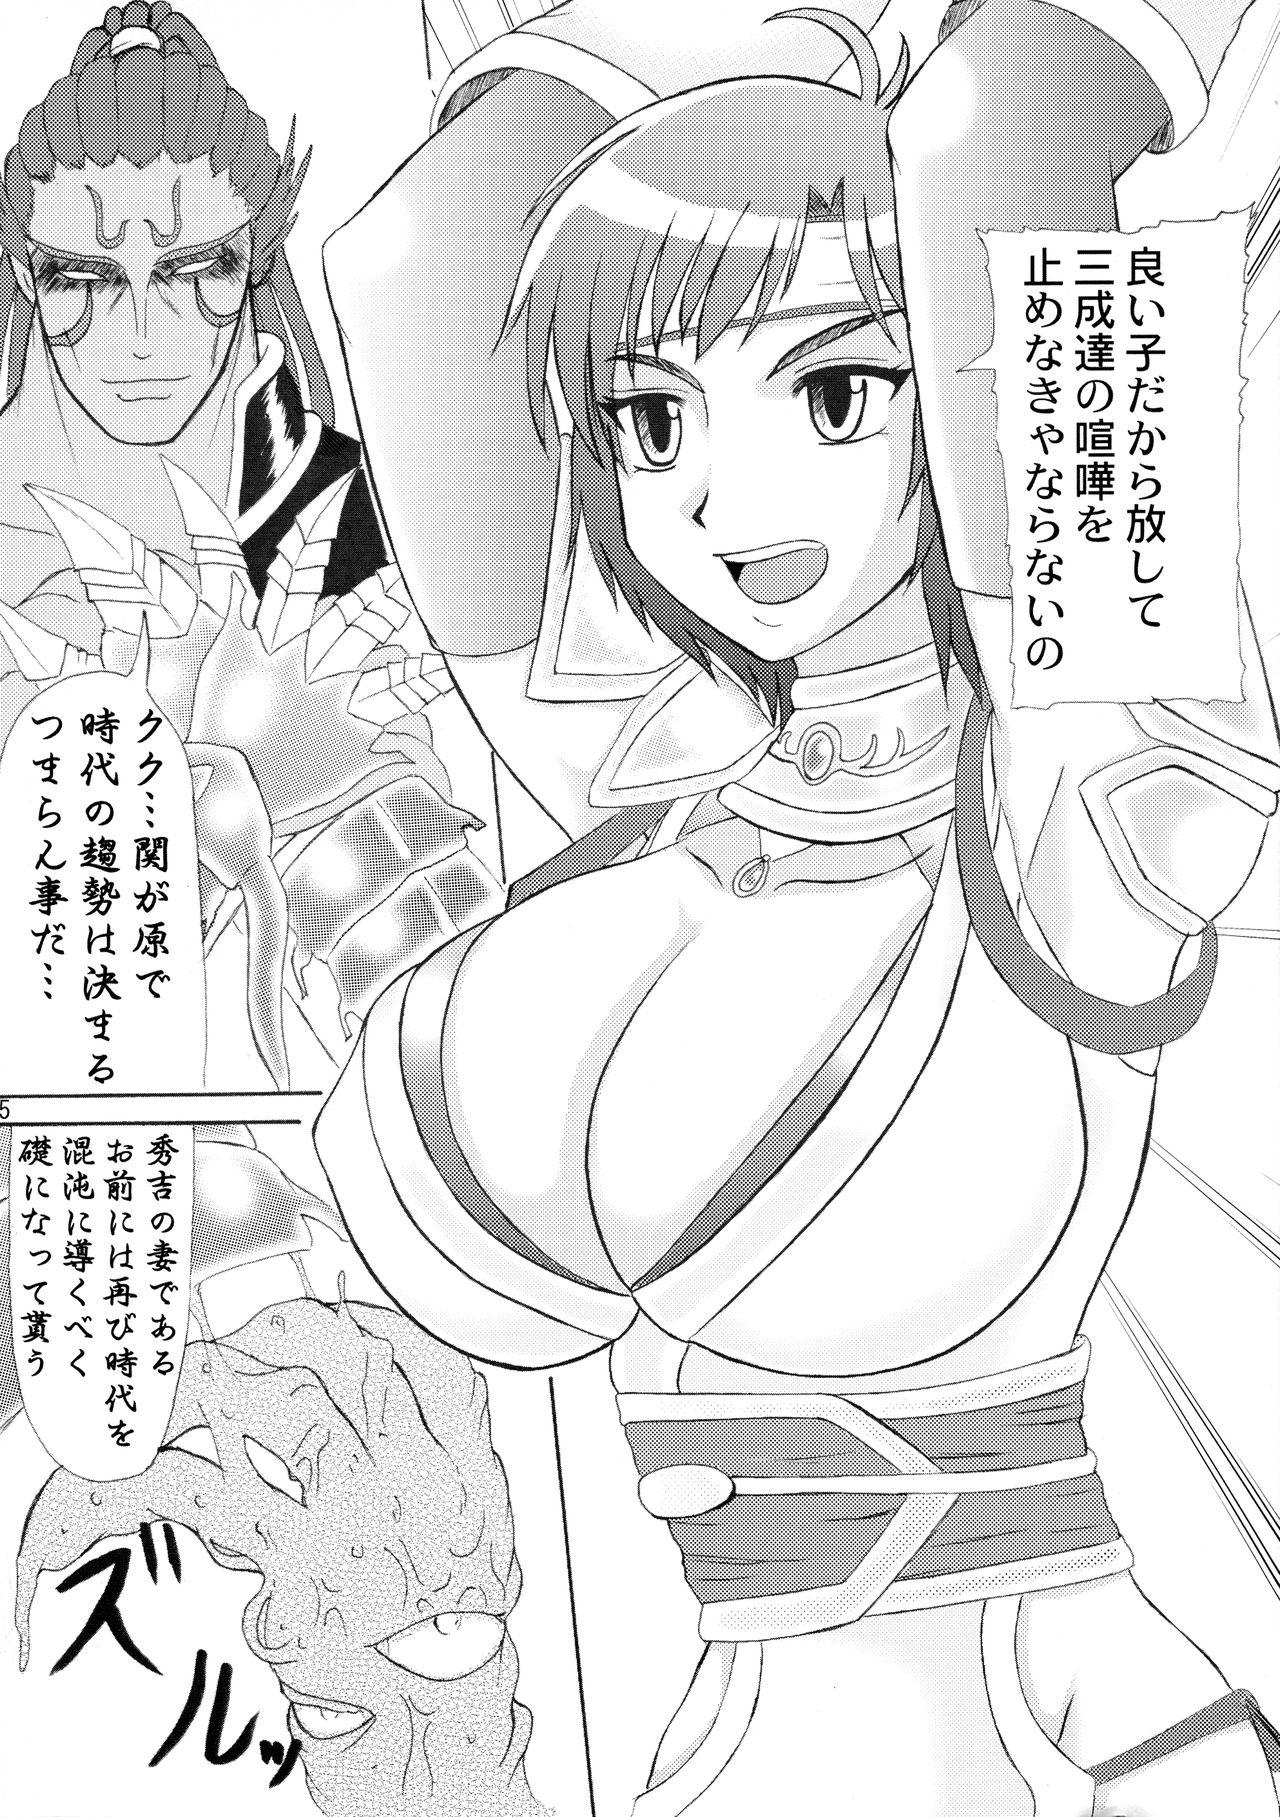 Office Sex Nenebote - Samurai warriors Warriors orochi Wetpussy - Page 5